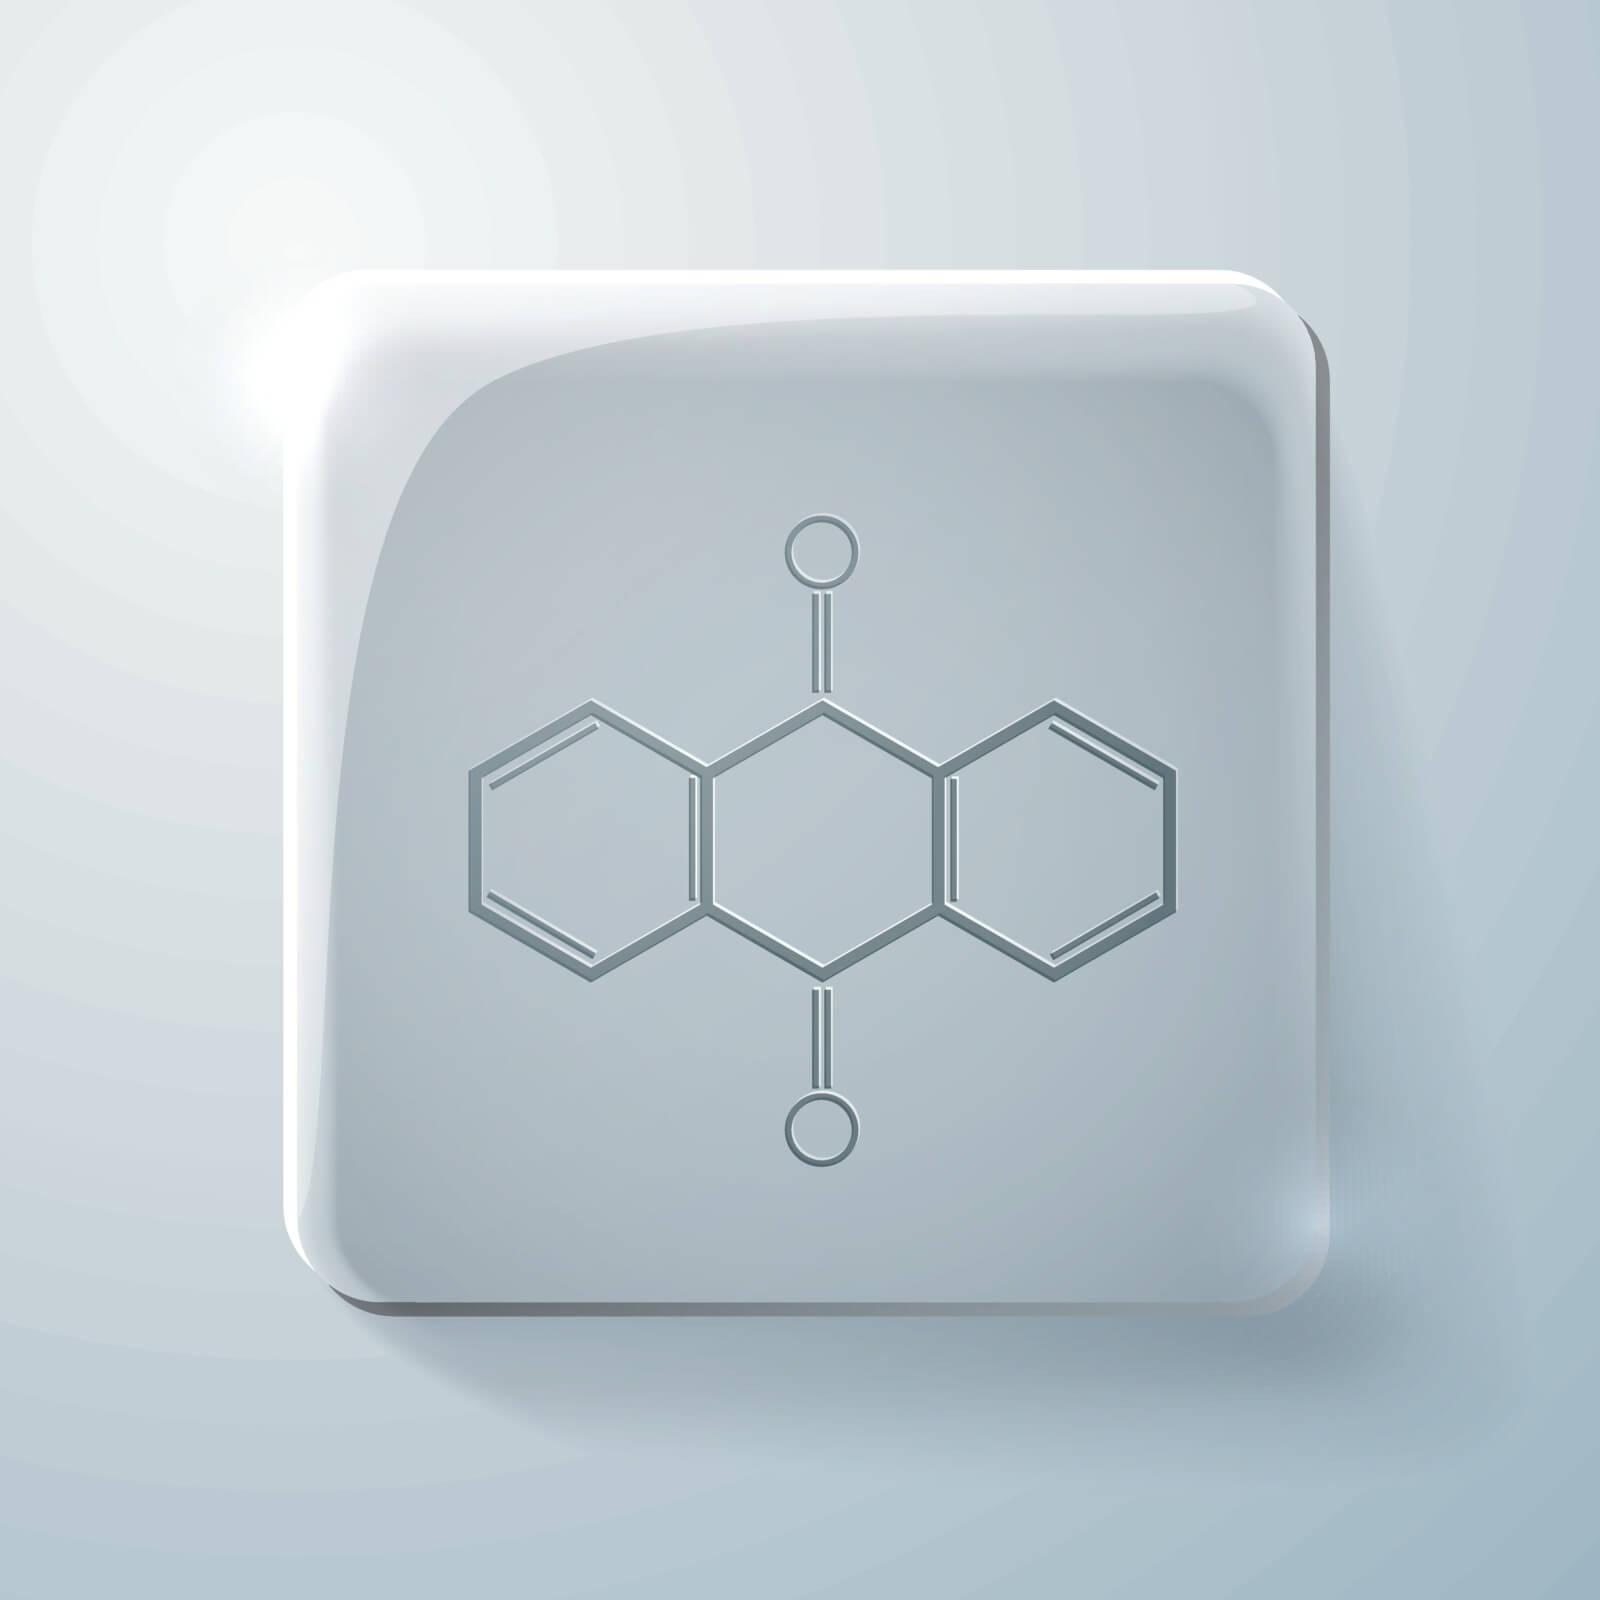 anthraquinone. chemical formula. Glass square icon with highlights